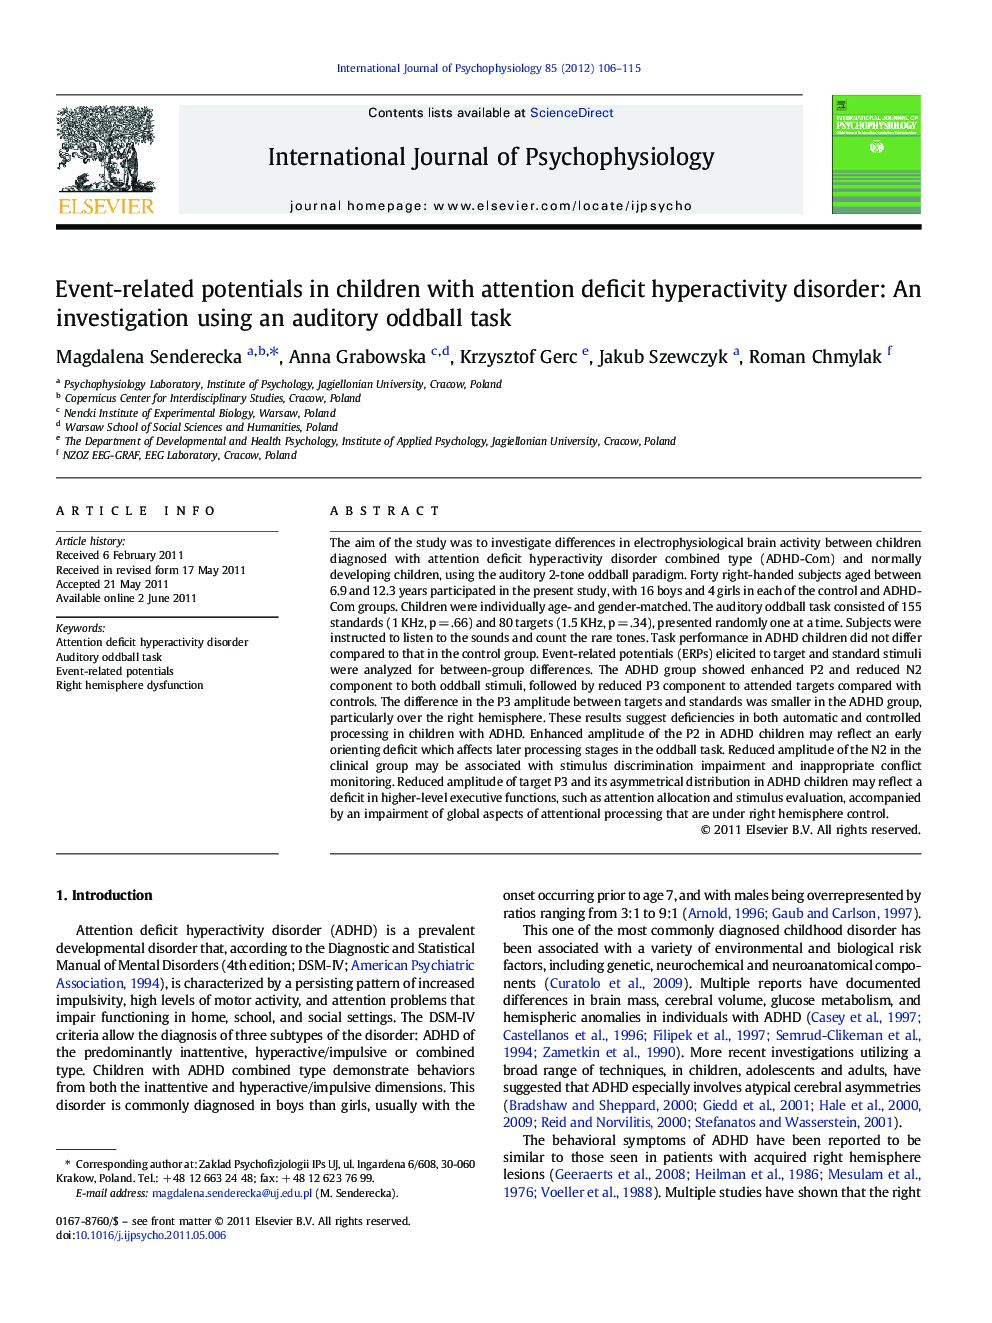 Event-related potentials in children with attention deficit hyperactivity disorder: An investigation using an auditory oddball task